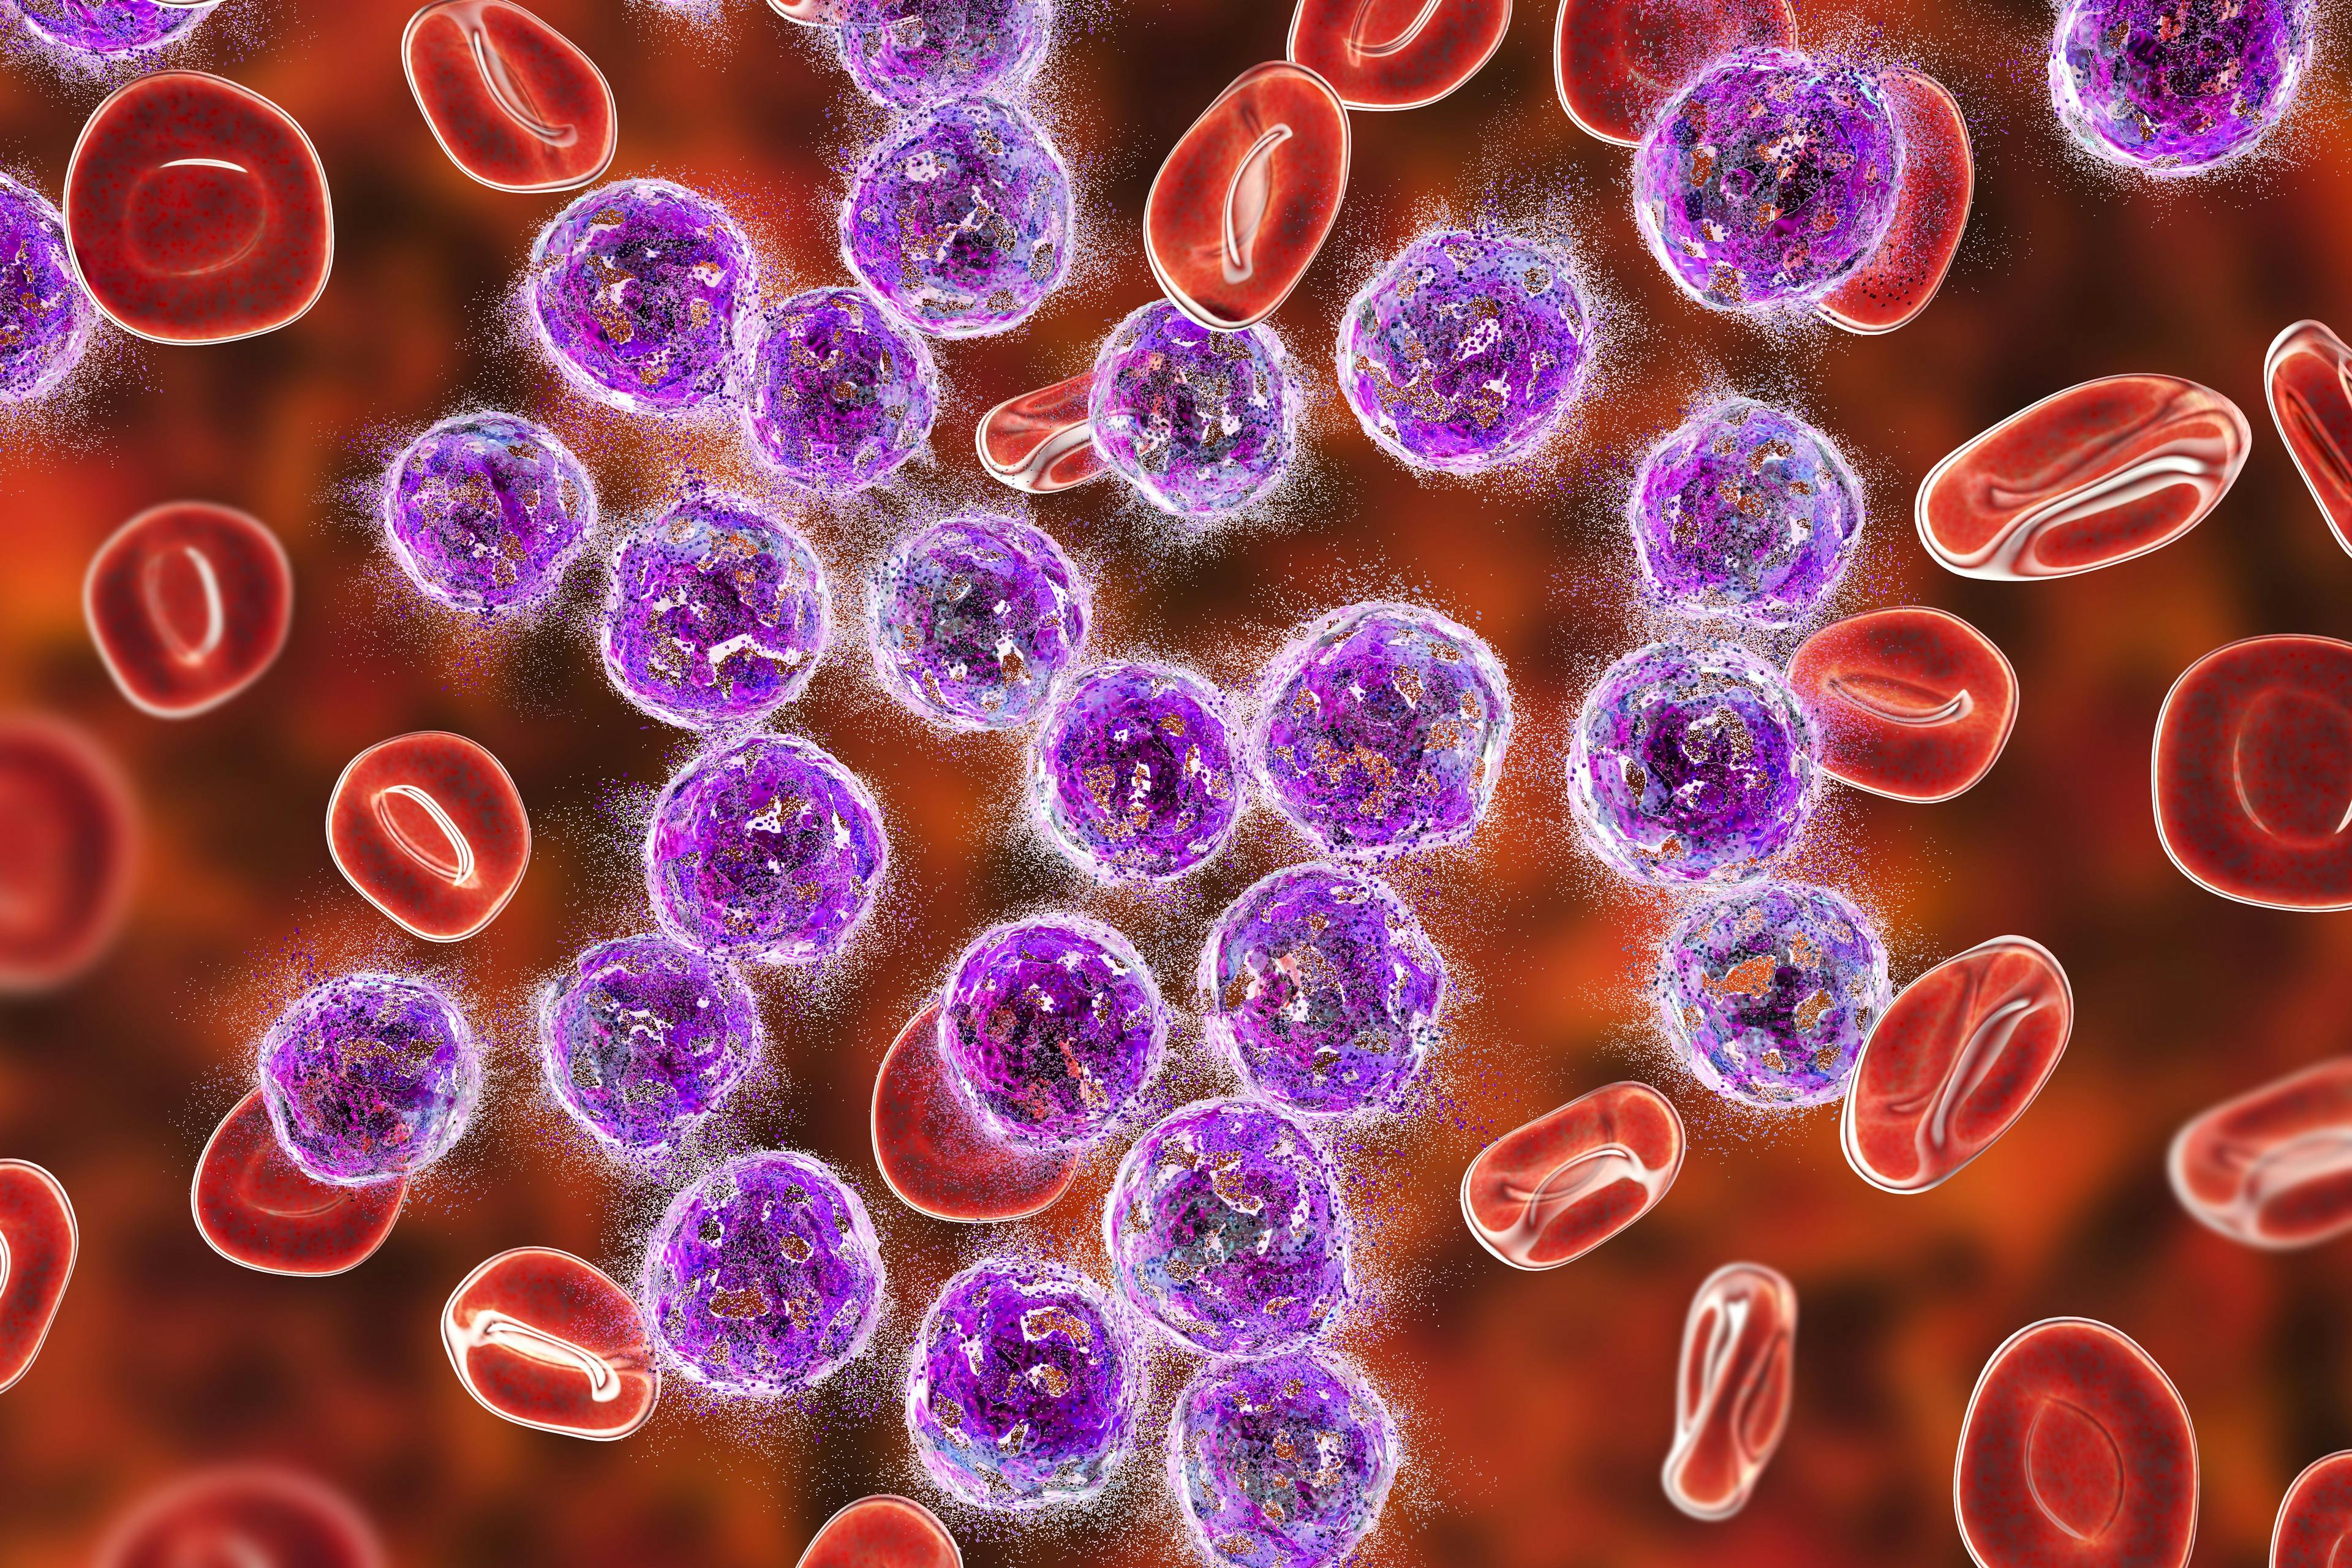 COVID-19 Mortality, Hospitalization Risk Higher in Patients With Blood Cancers